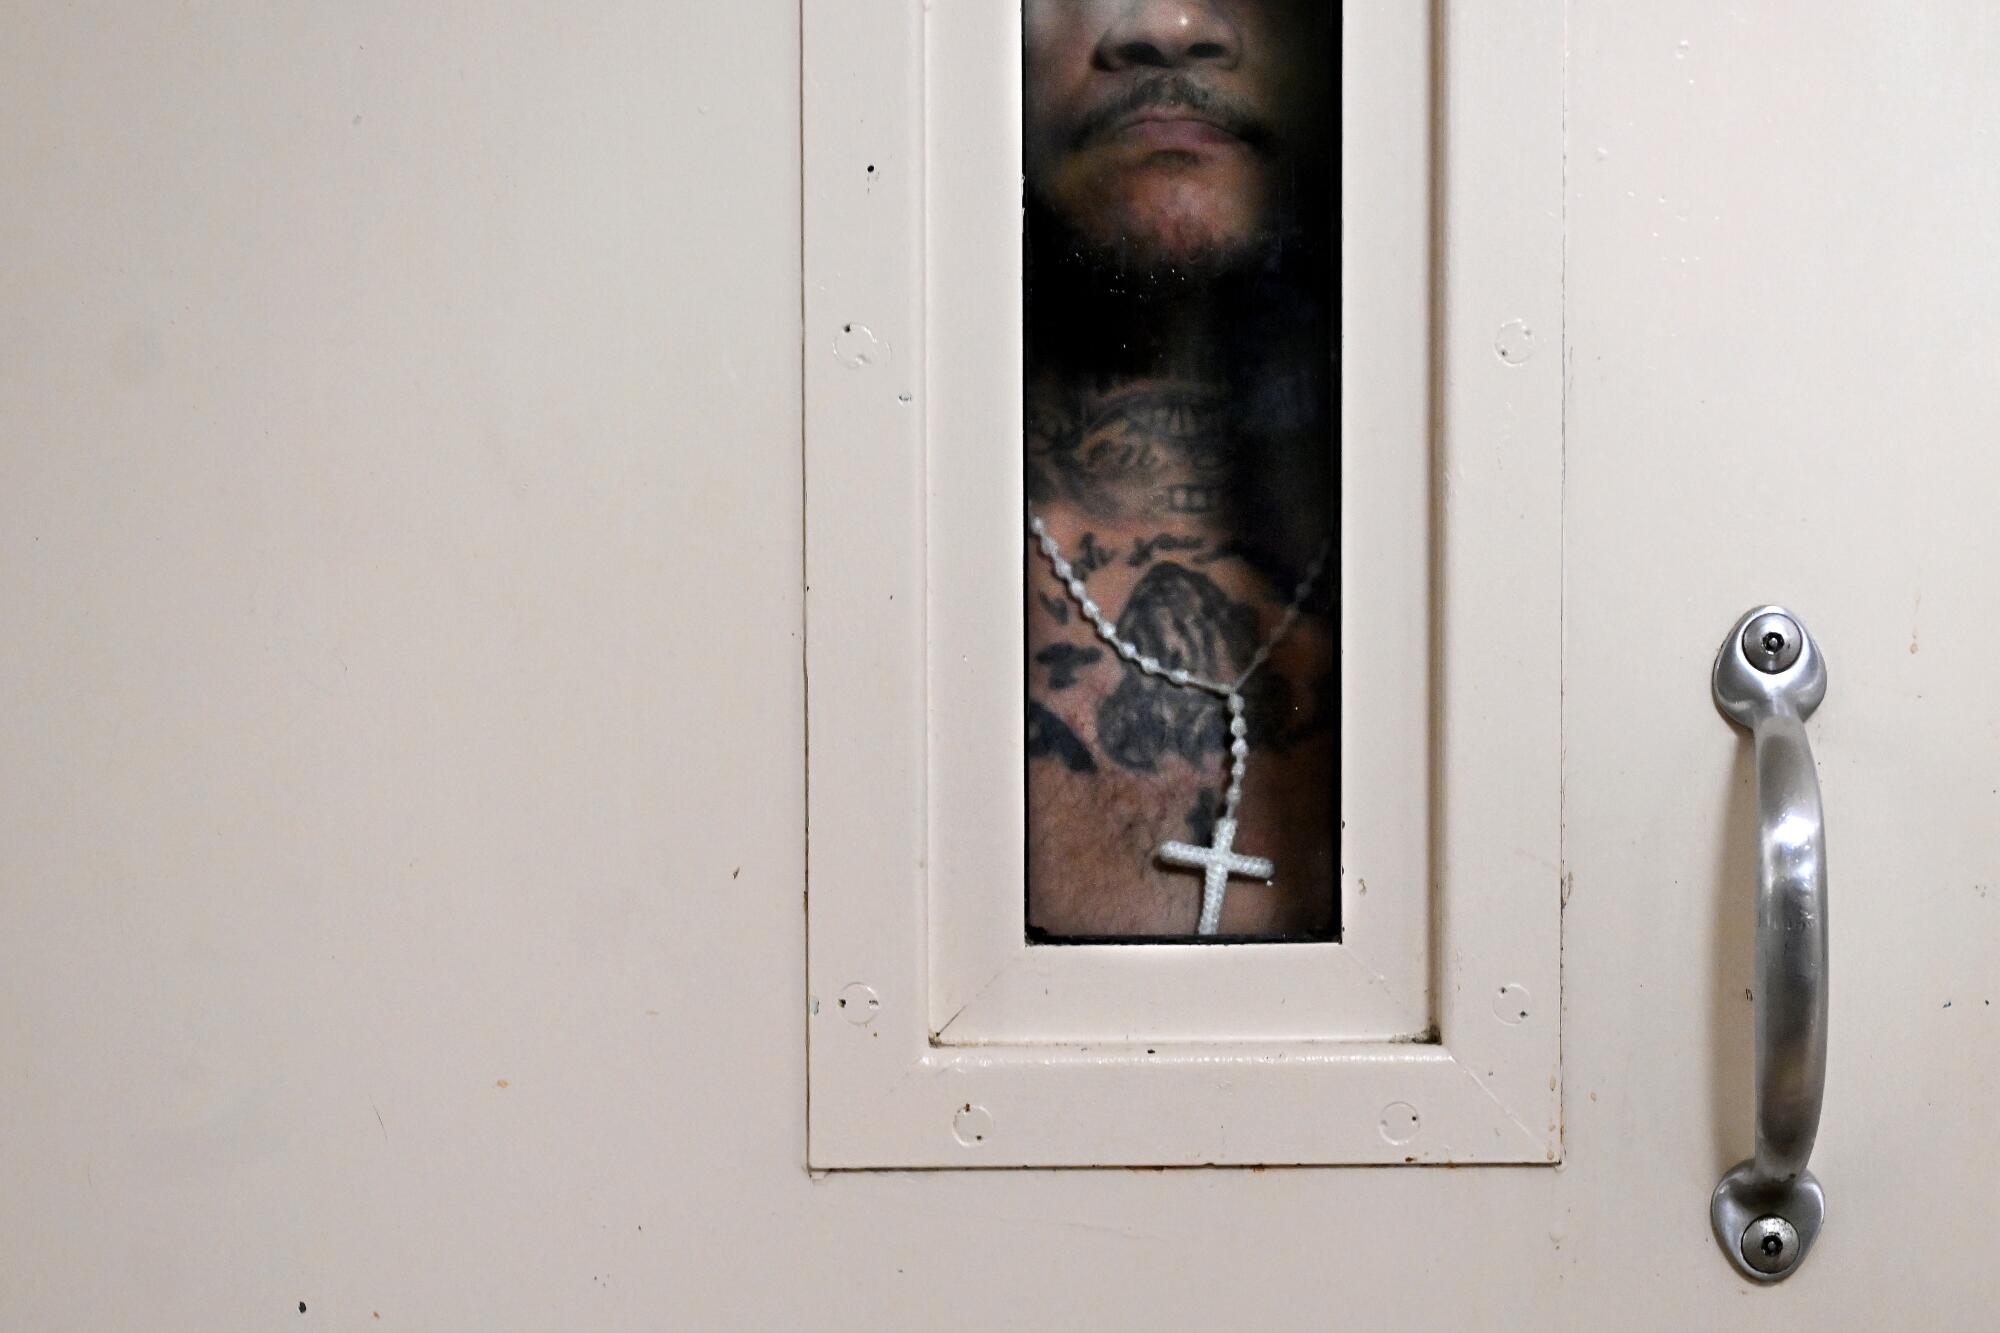 An inmate looks out of a jail cell.